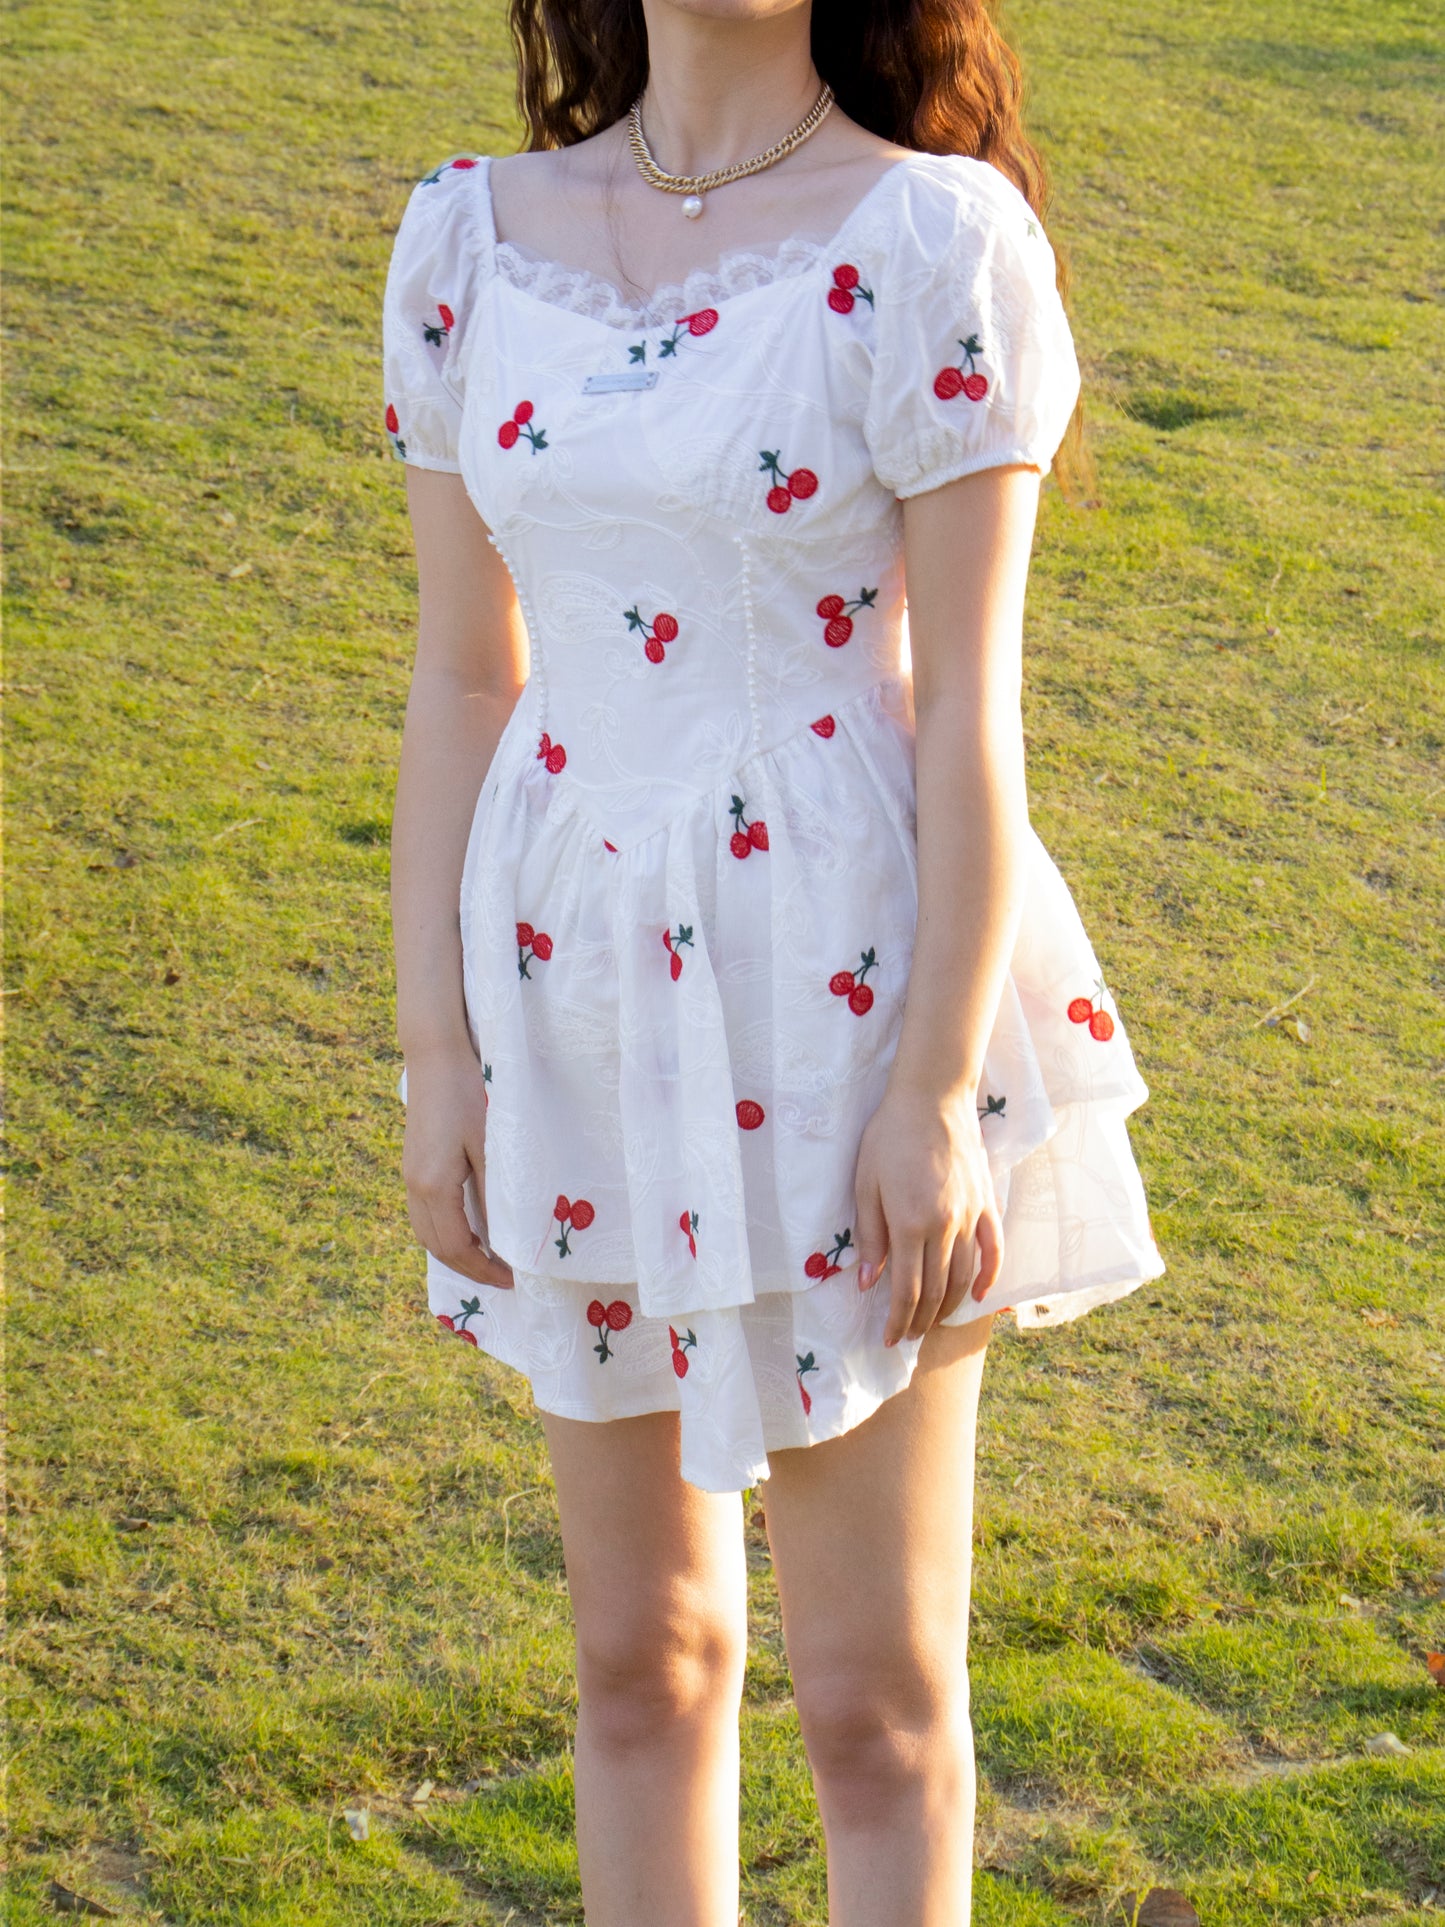 Embroidered Cherry White Dress